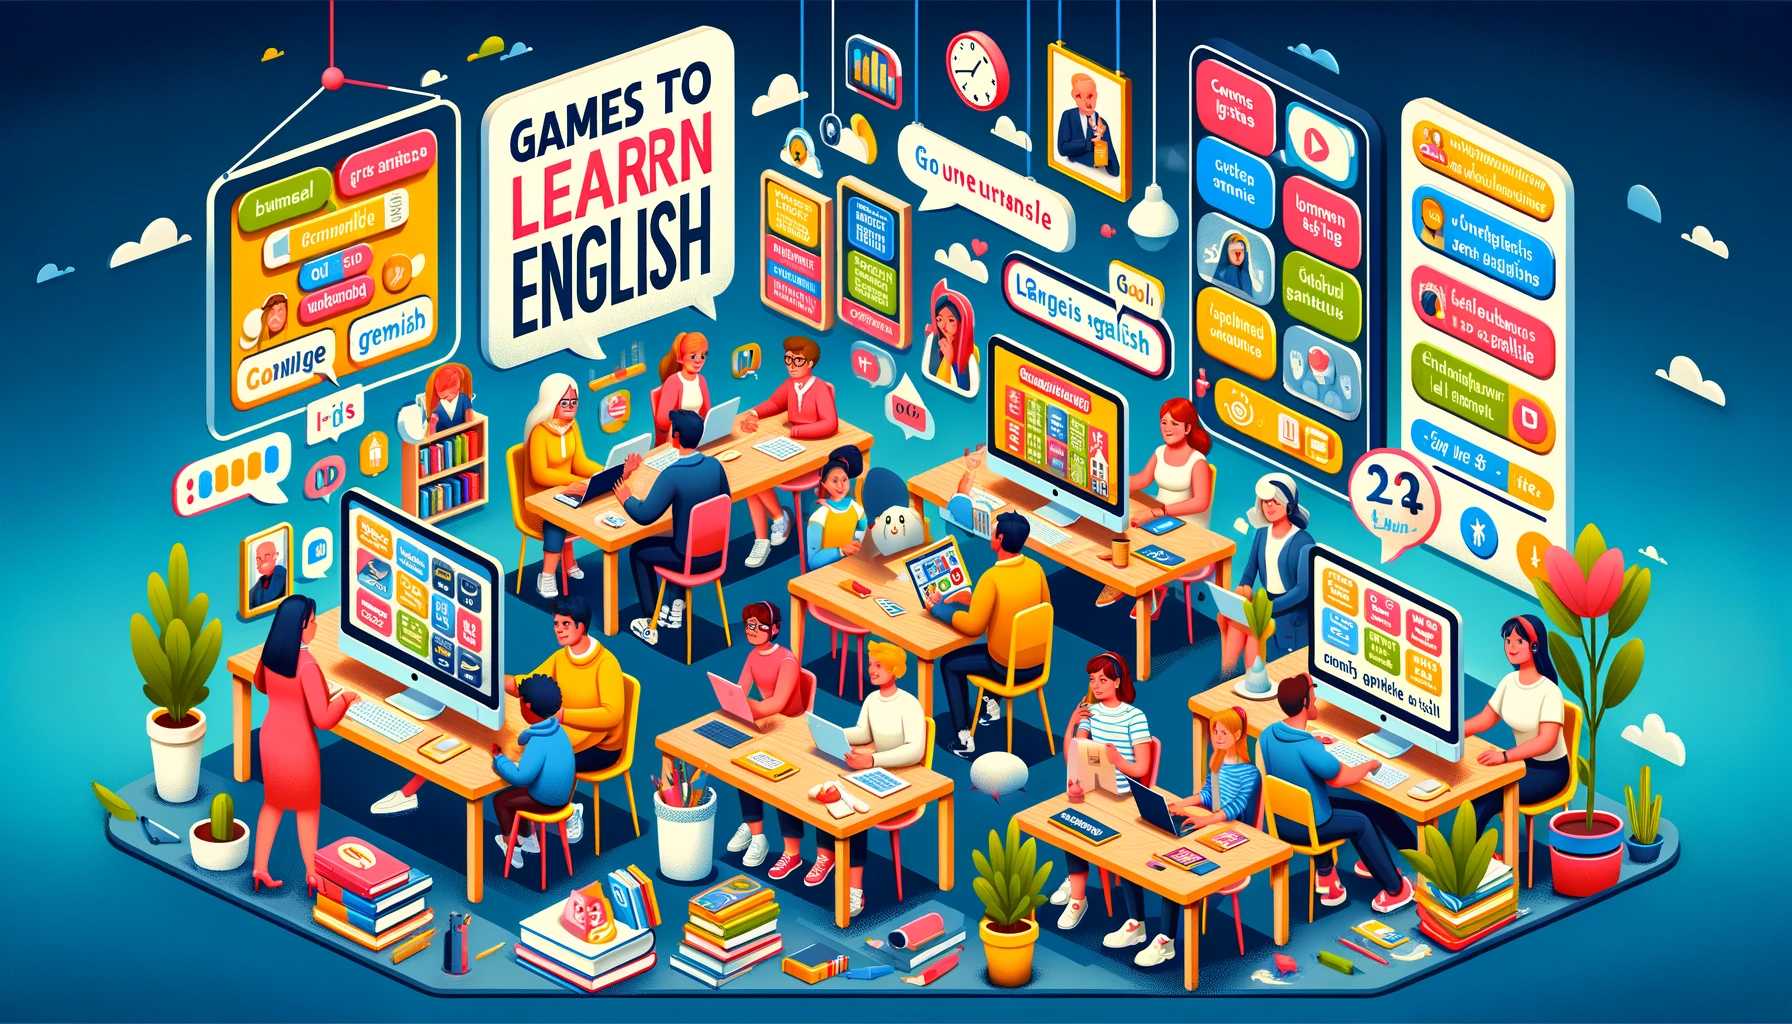 Games to Learn English: A Fun and Effective Way to Improve Your Language Skills